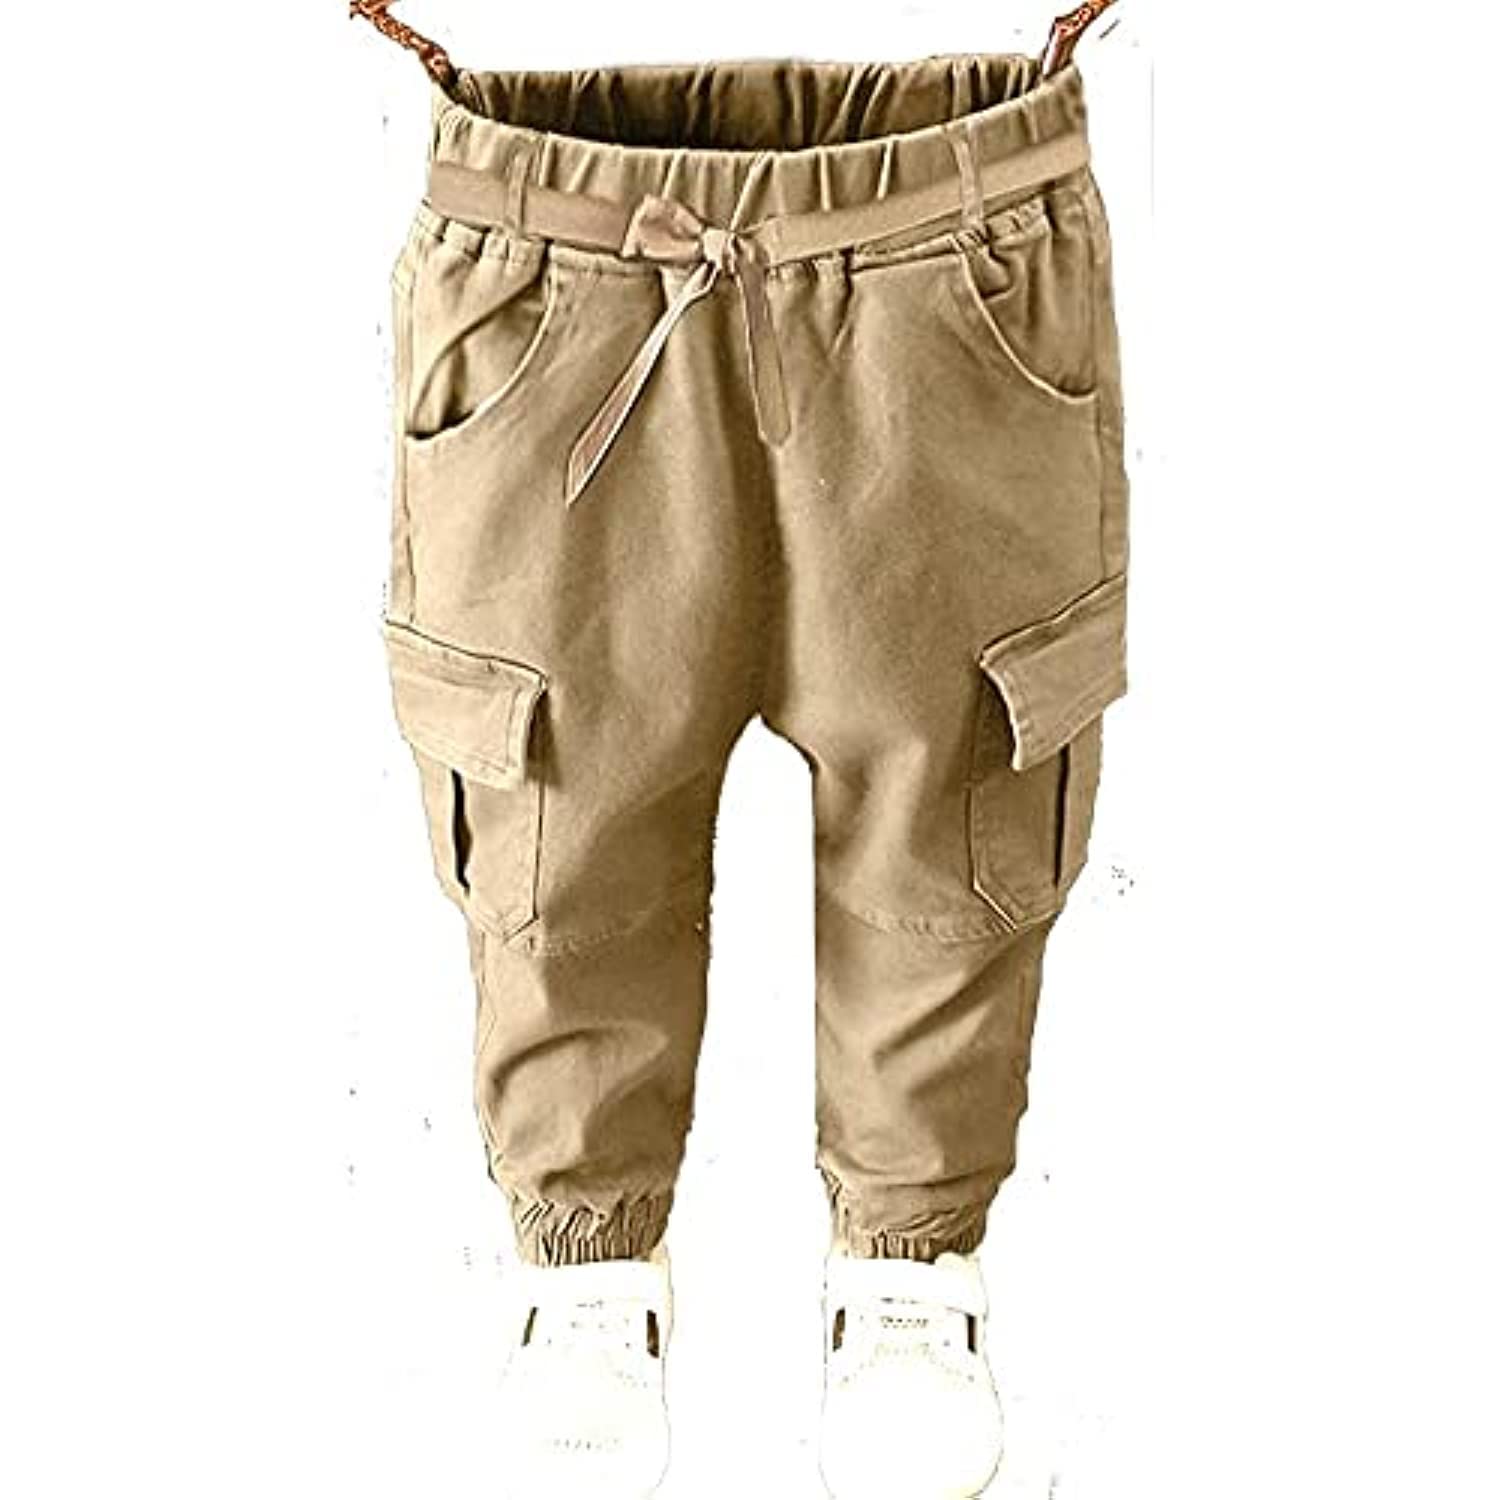 Buggy Drawstring Pants for children 4-6 years old - color Color Beige Size 4-6 Years